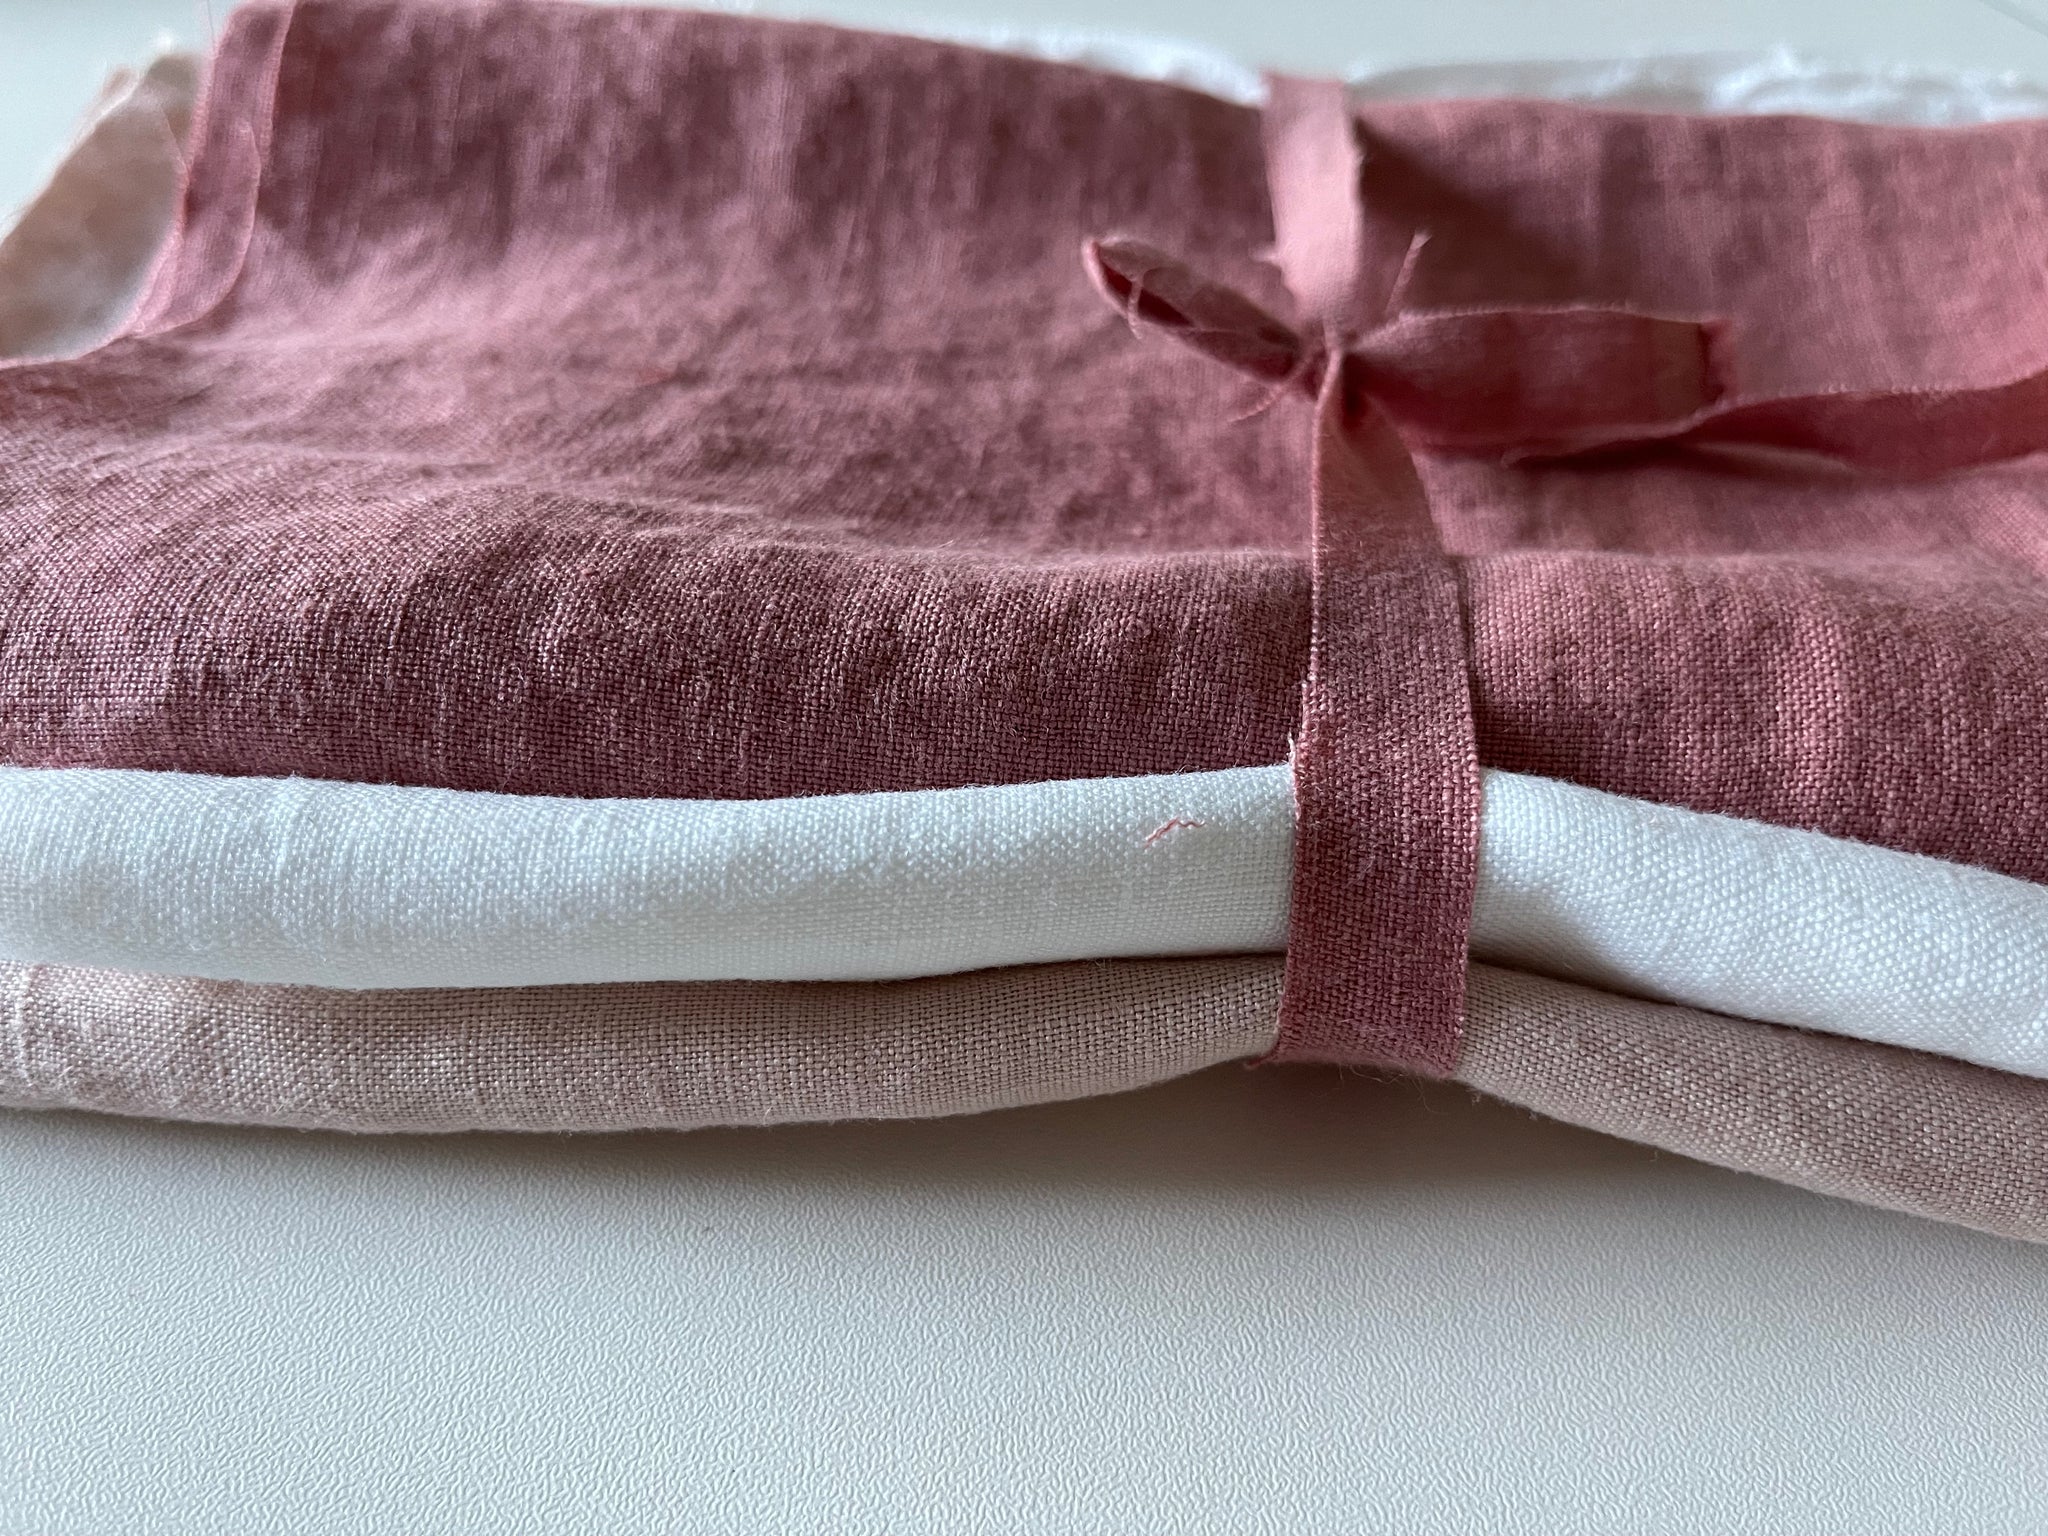 Linen Fabric Remnants - Pure White, Dusty Rose, Old Rose